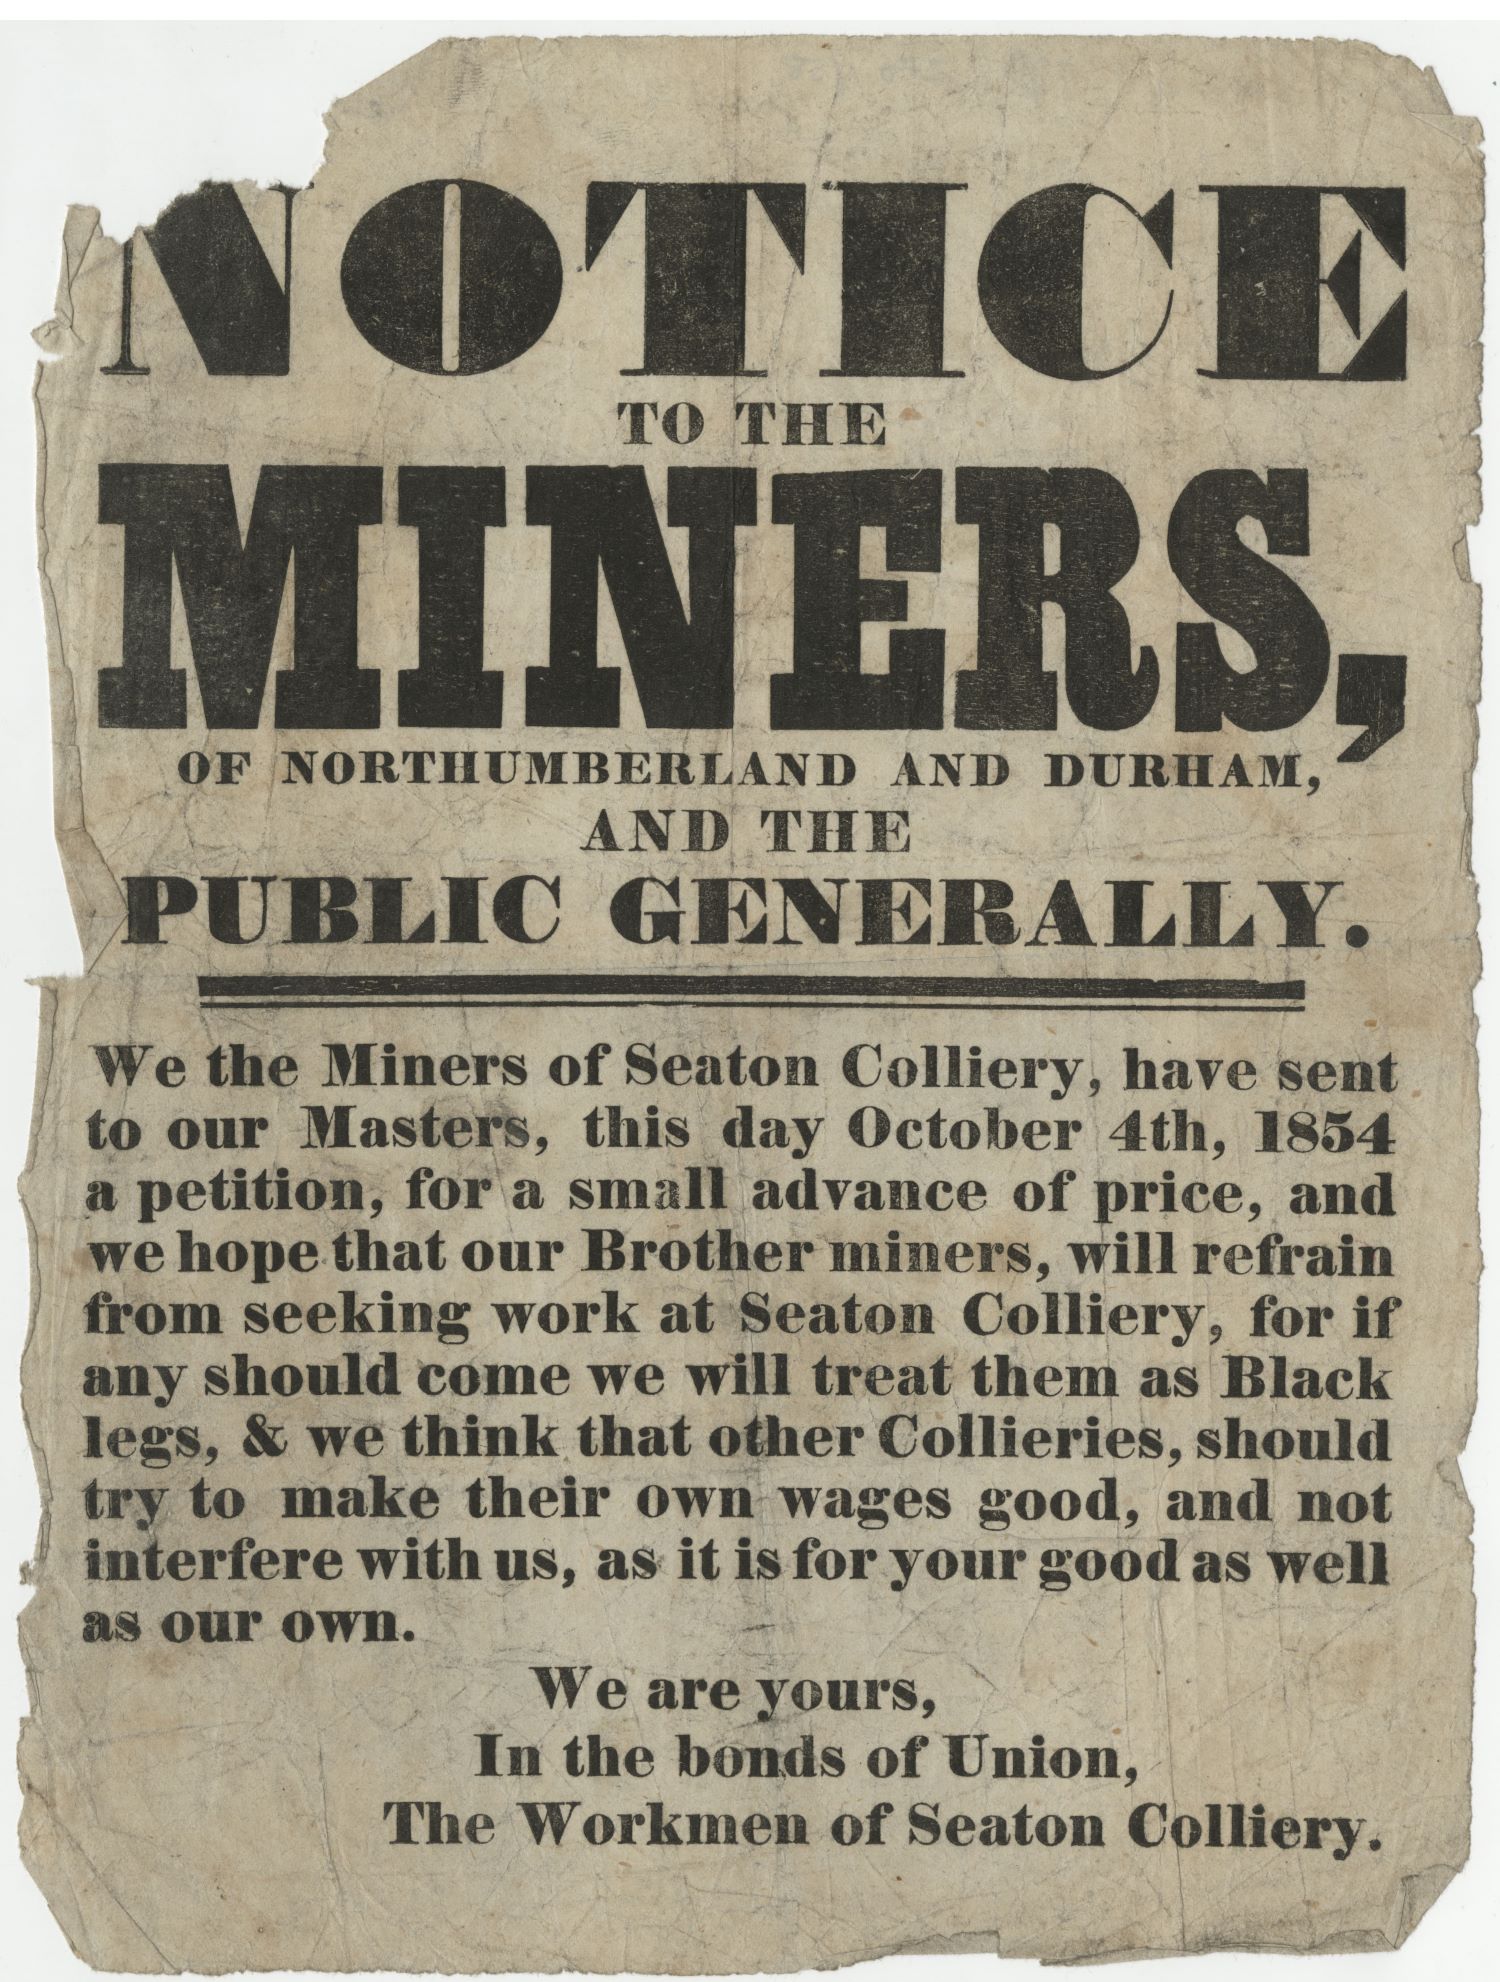 A notice for miners